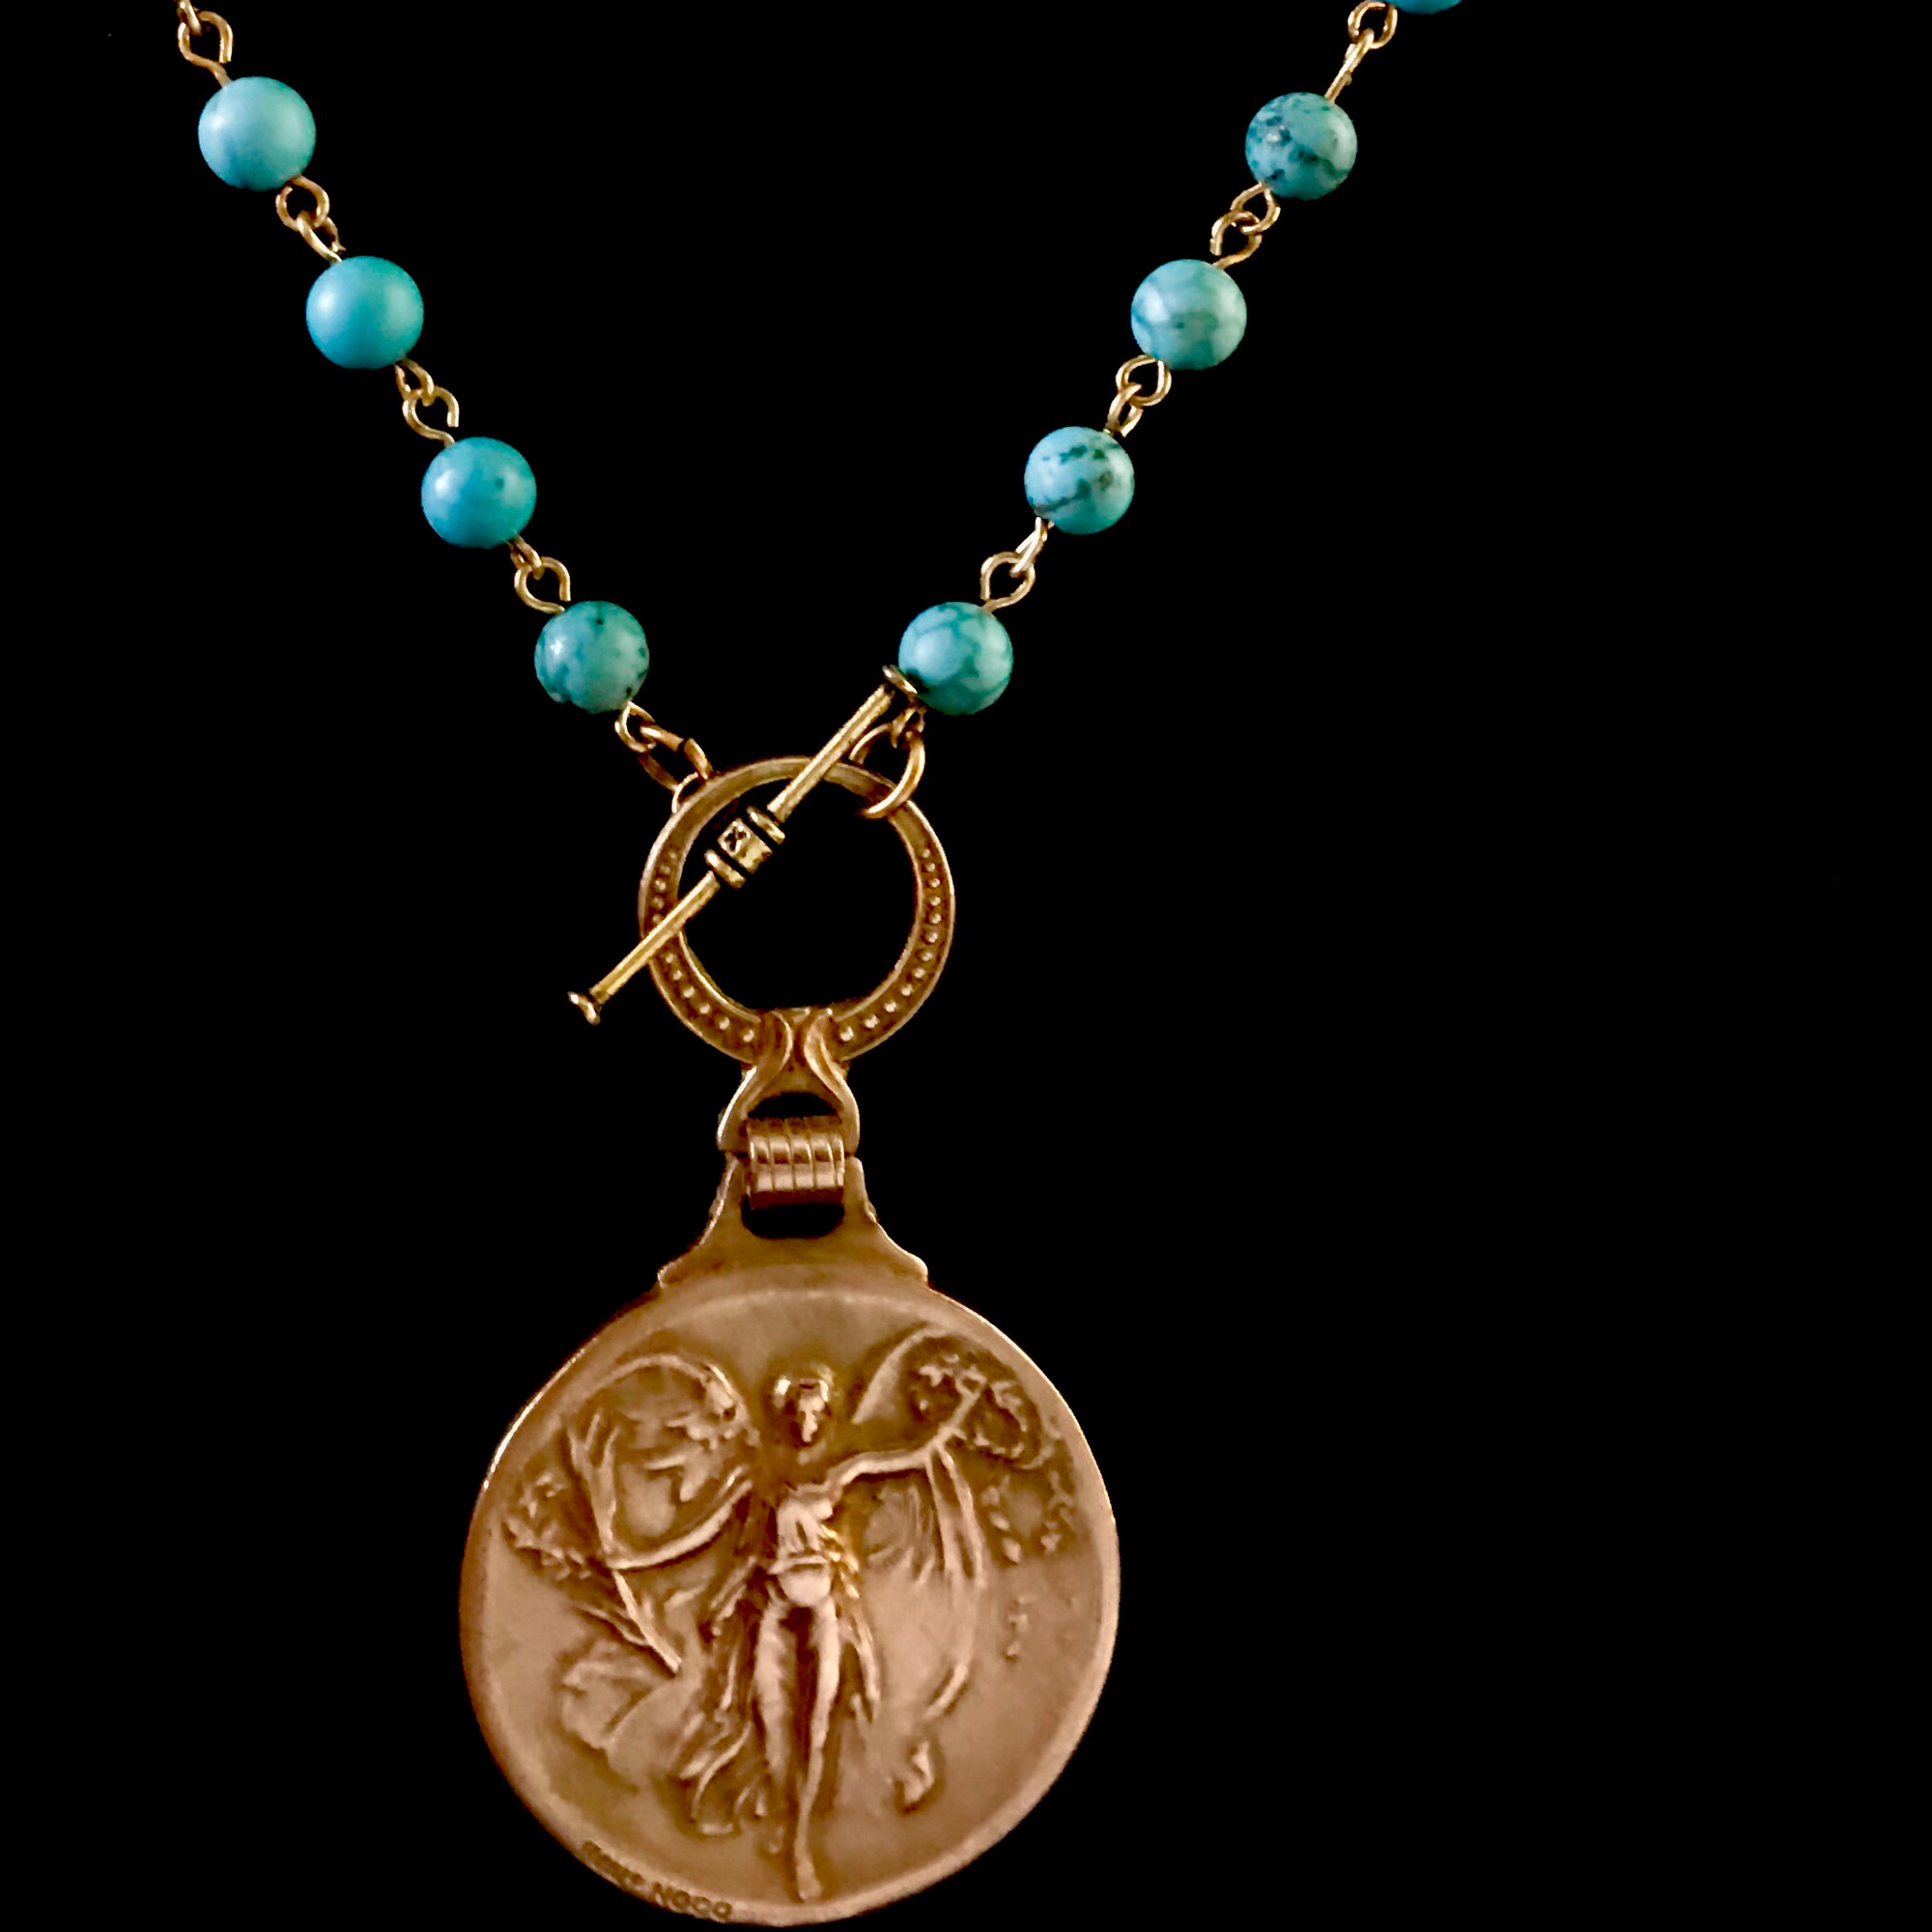 Nike the Goddess of Victory Turquoise and Gold Necklace